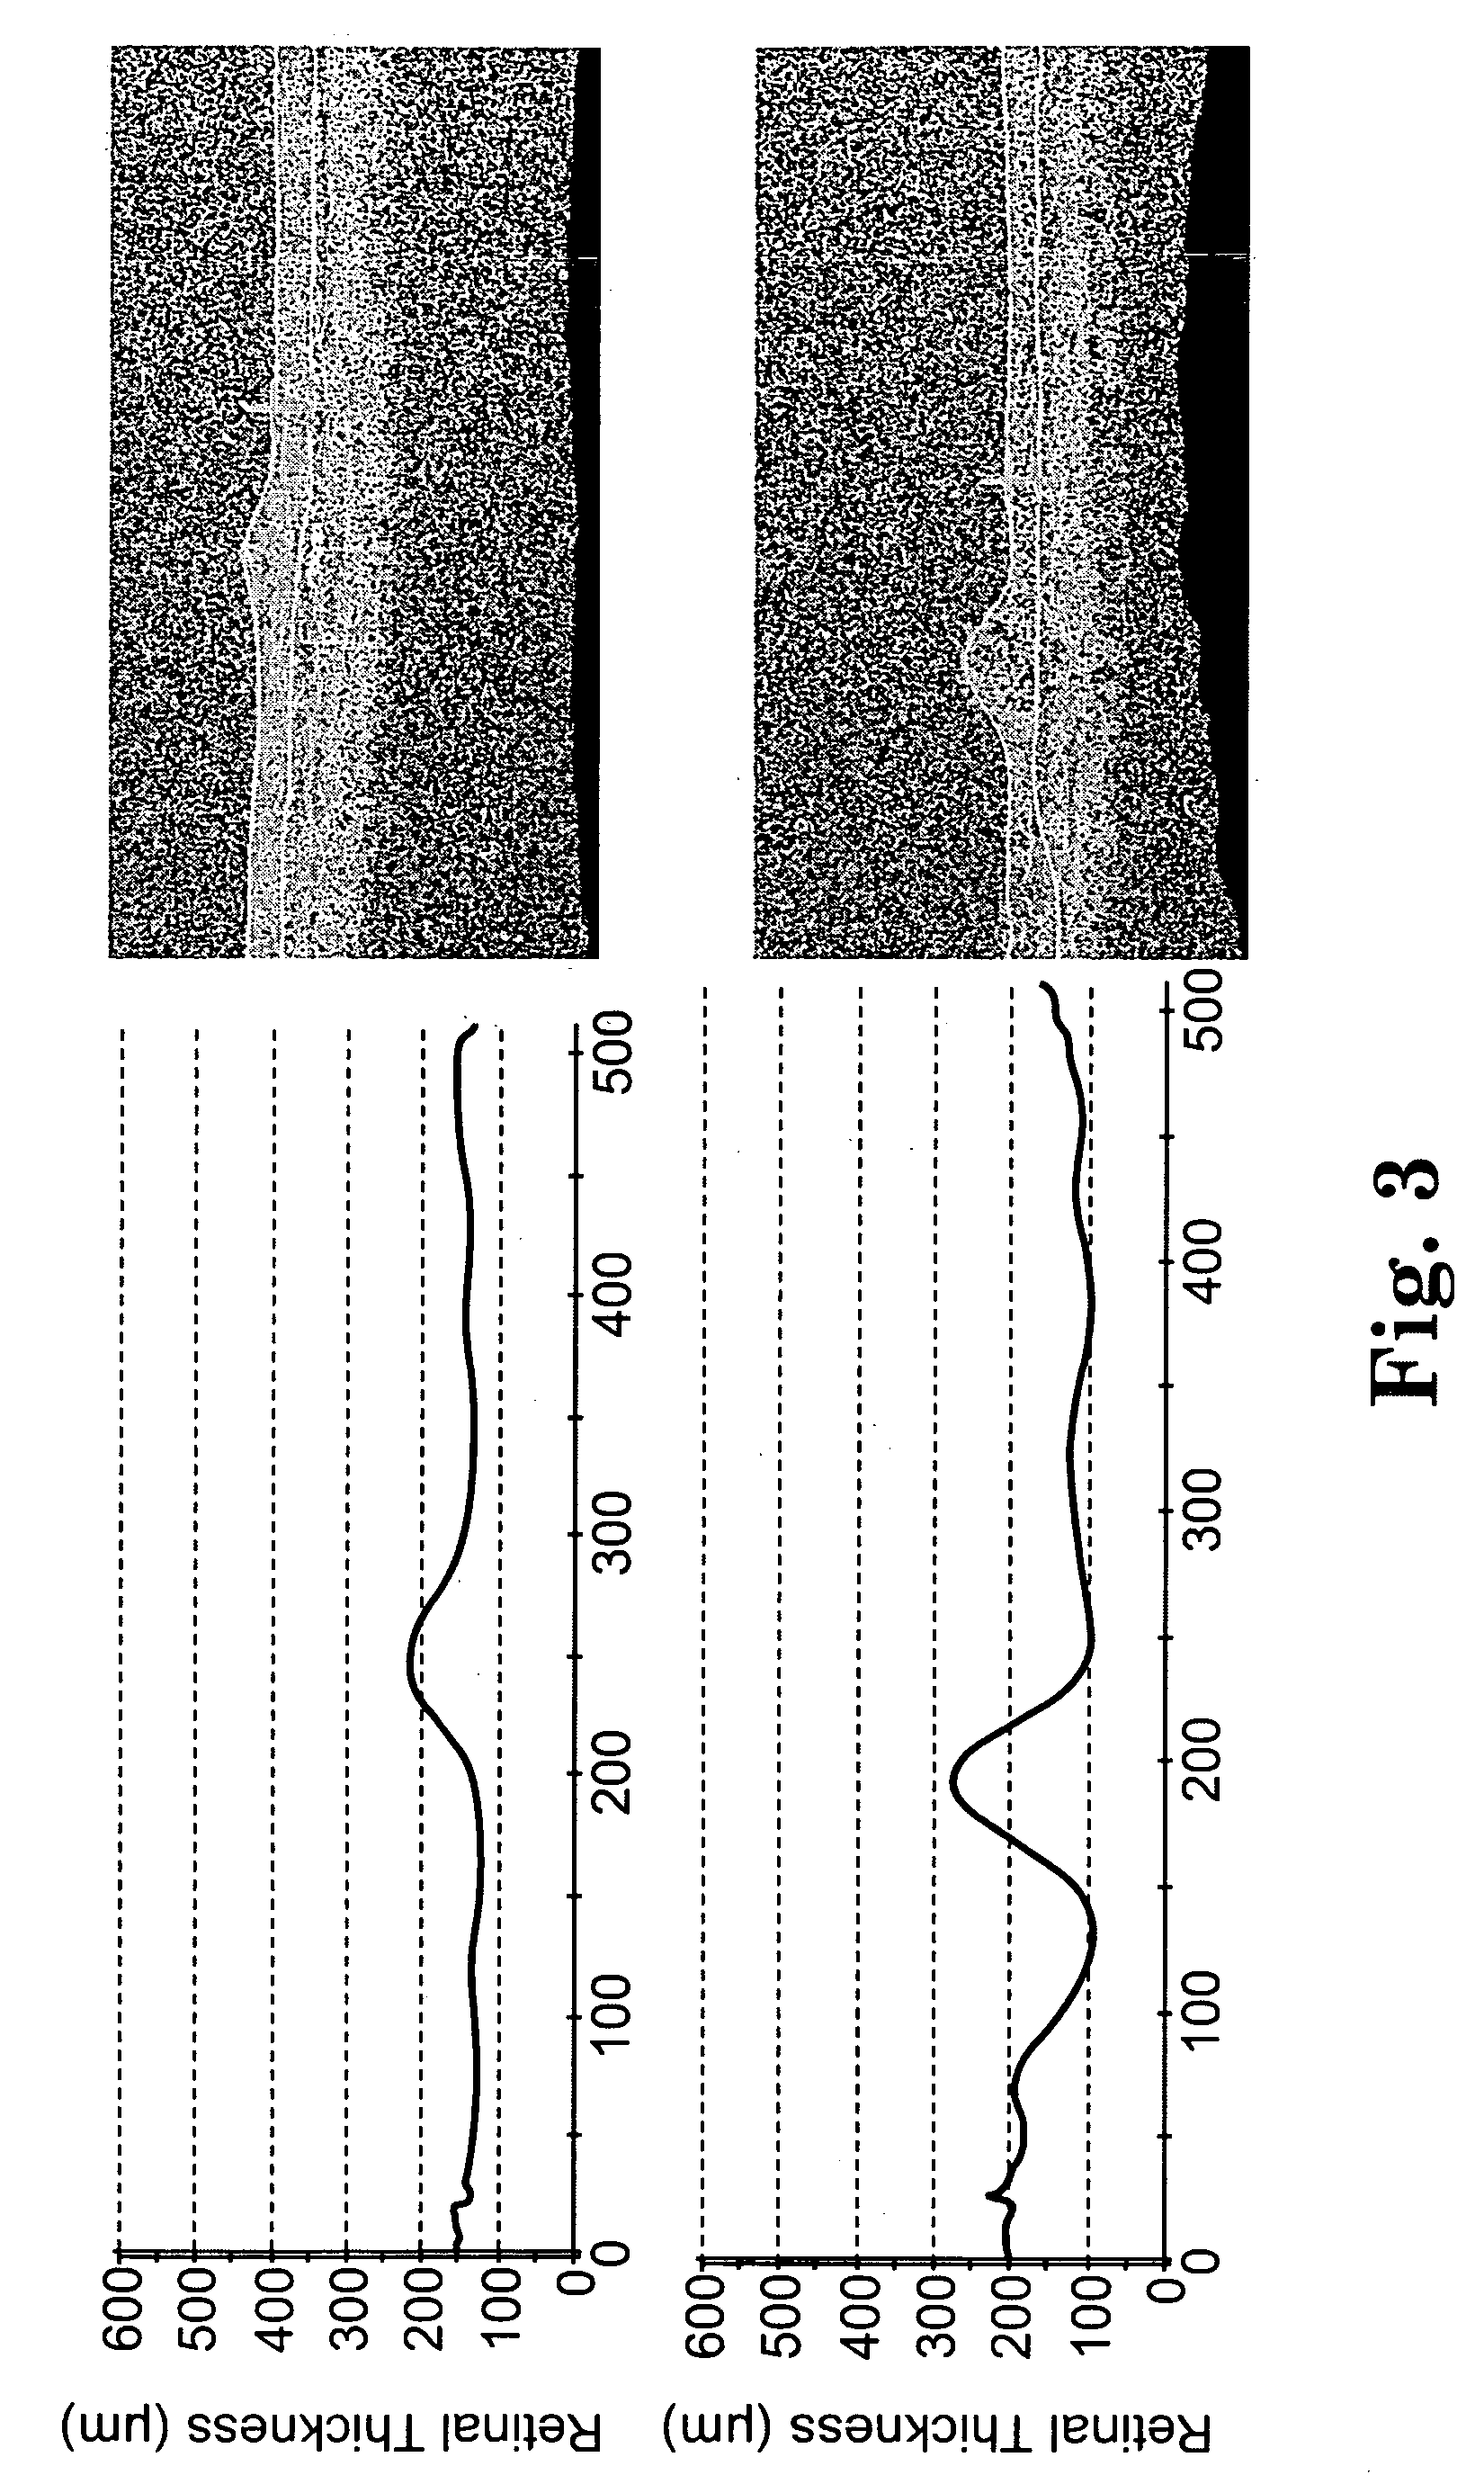 Sustained release implants and methods for subretinal delivery of bioactive agents to treat or prevent retinal disease